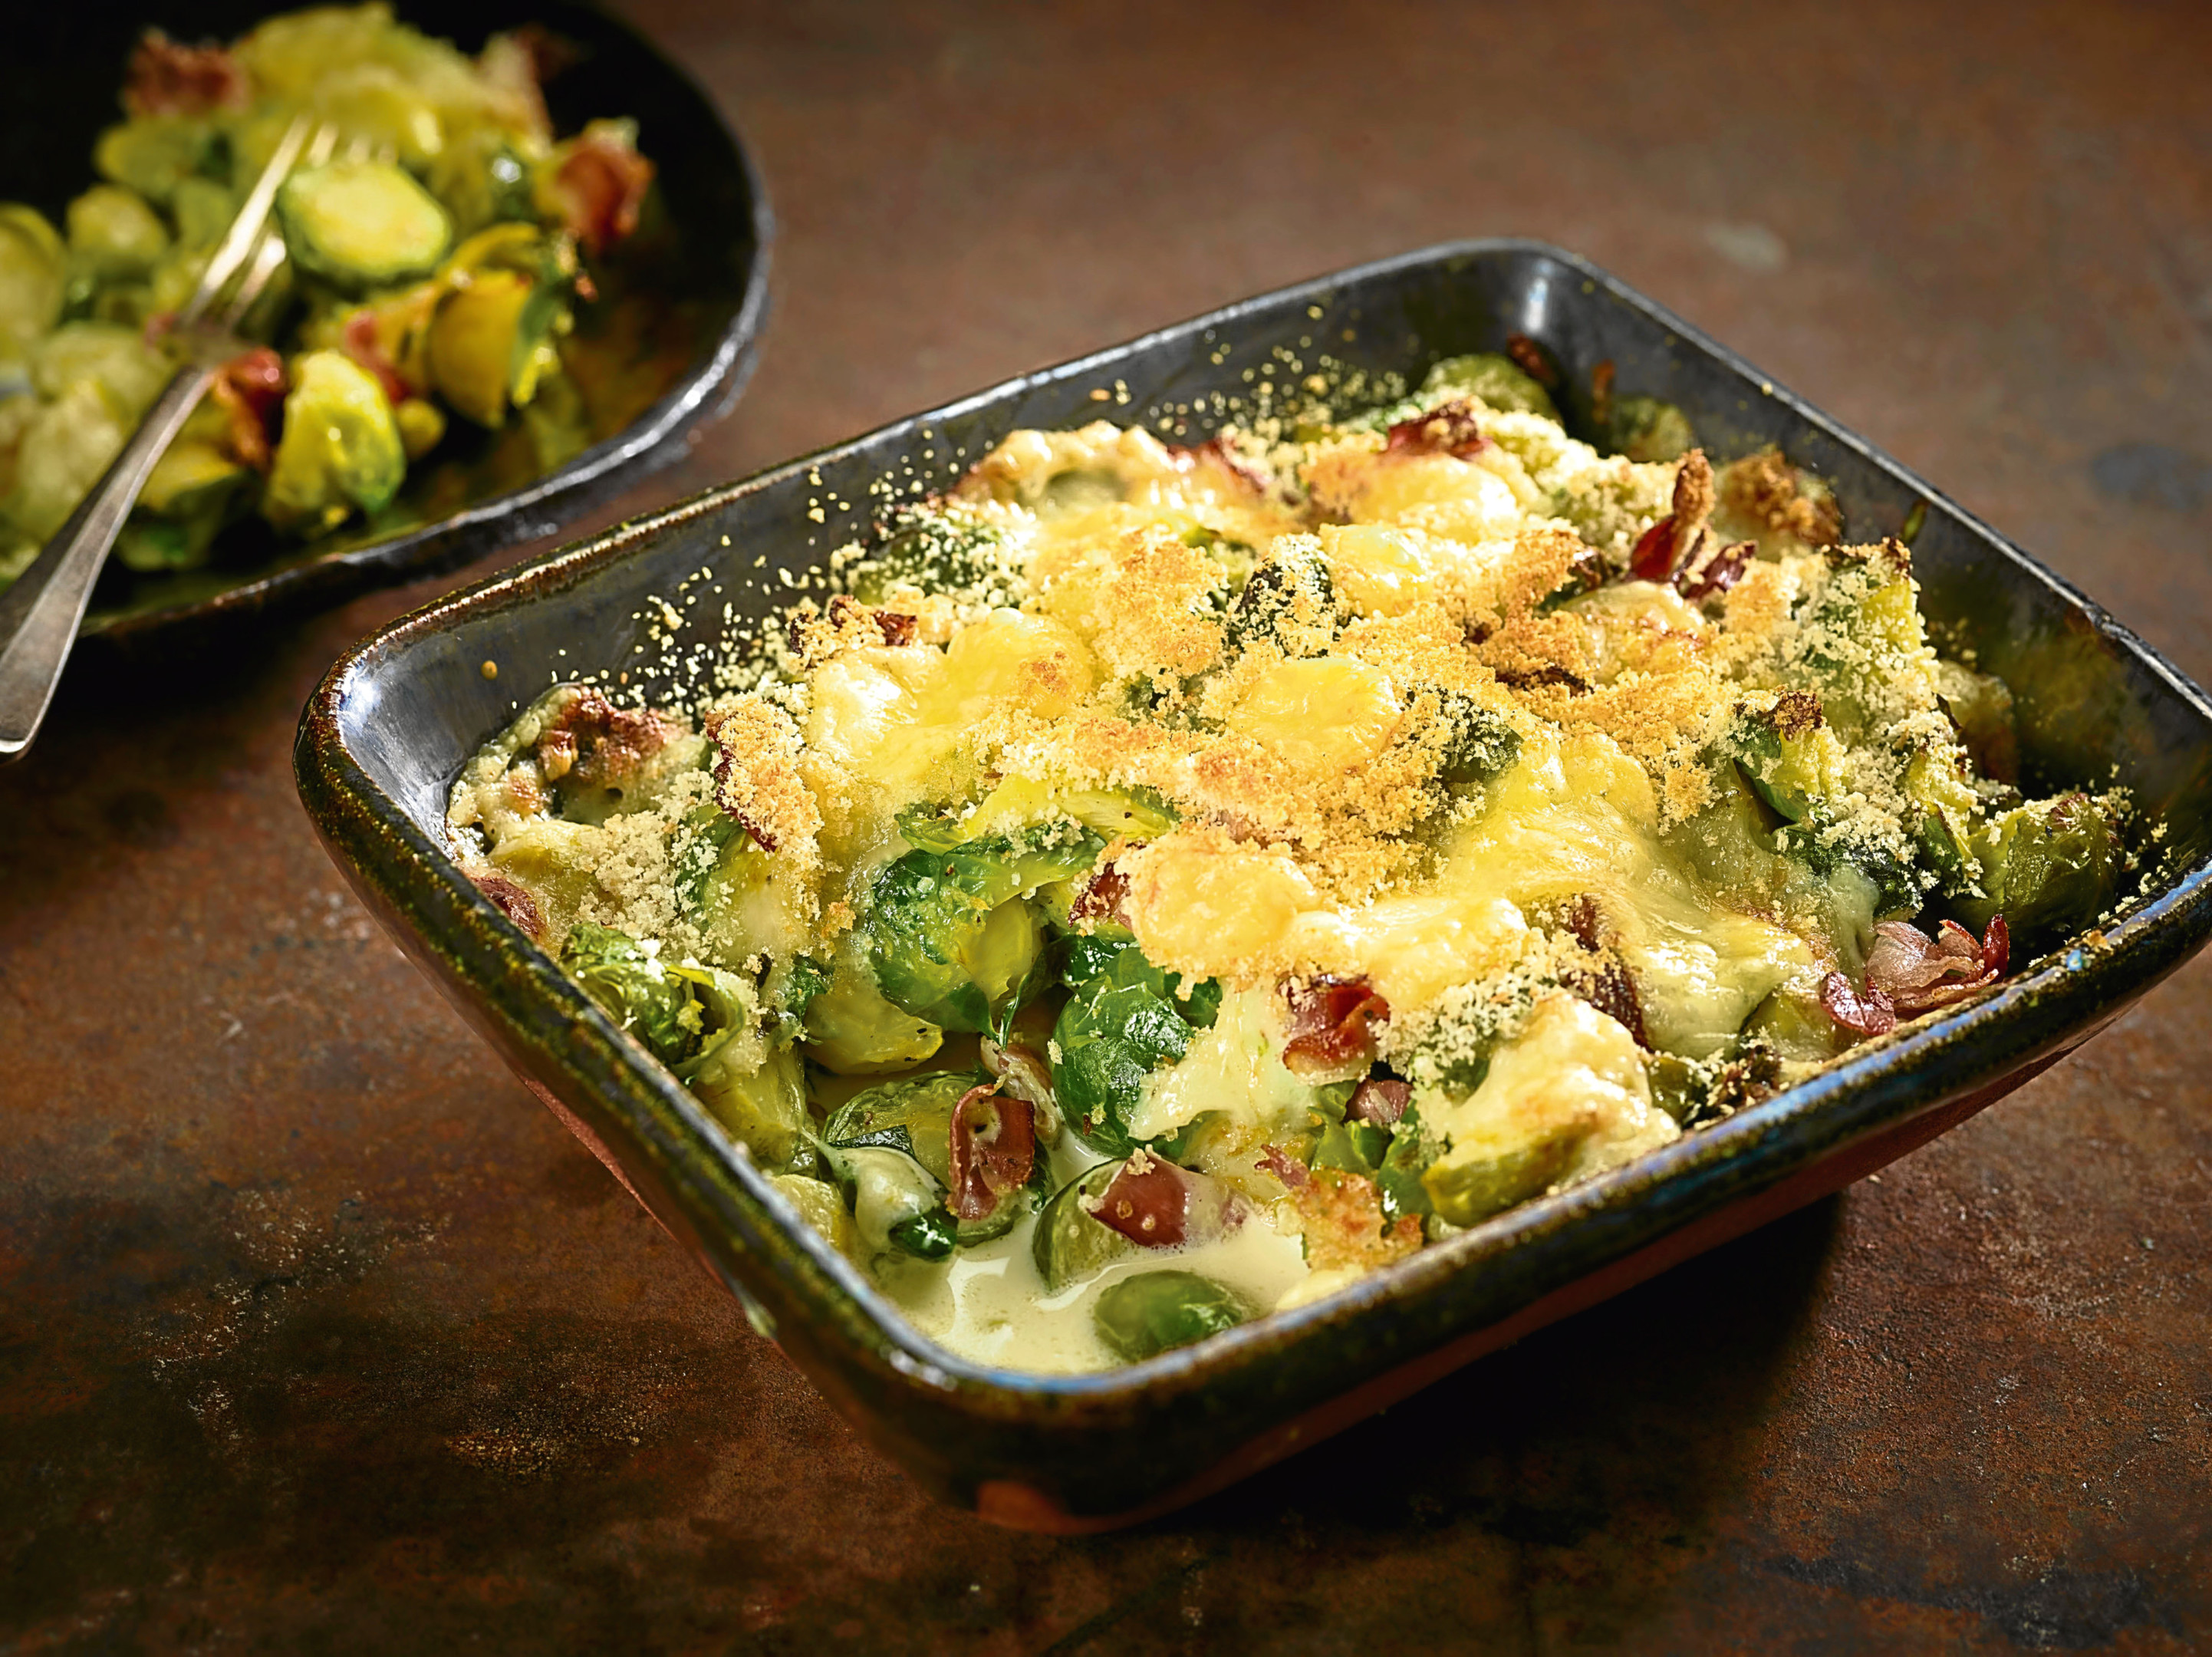 Comte brussels sprouts recipe